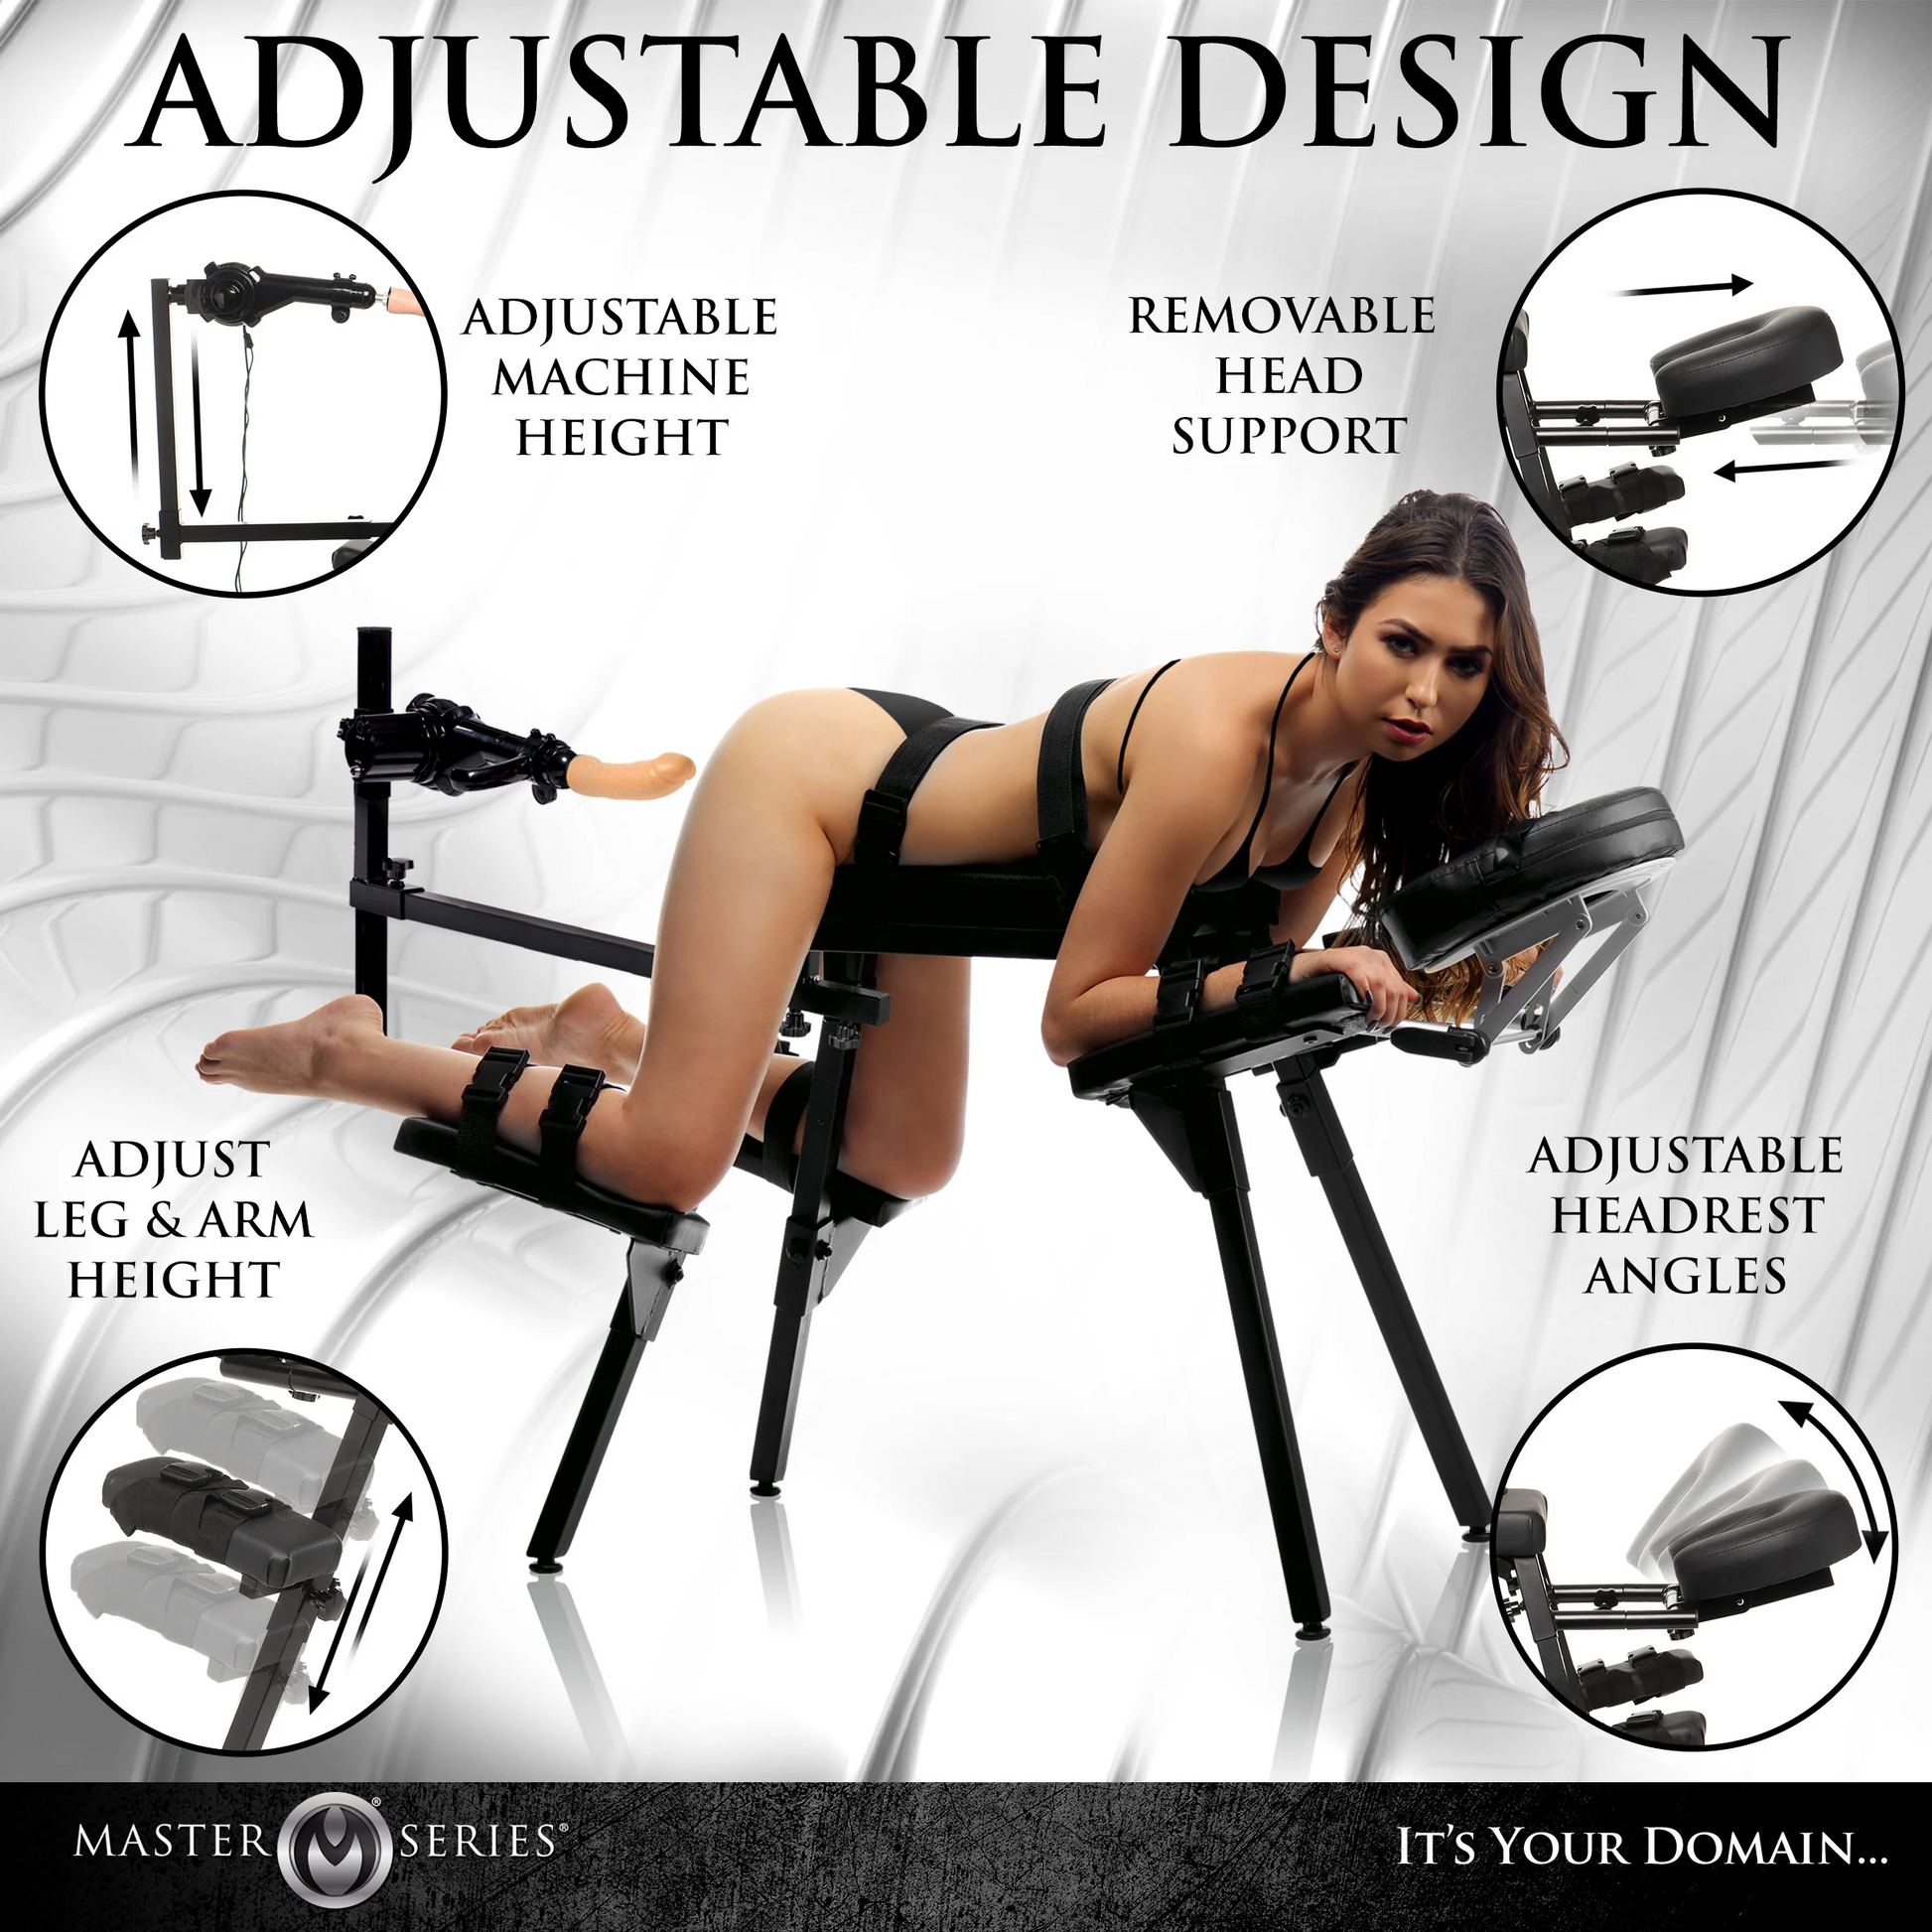 Master Series Obedience Bench and Sex Machine - XOXTOYS